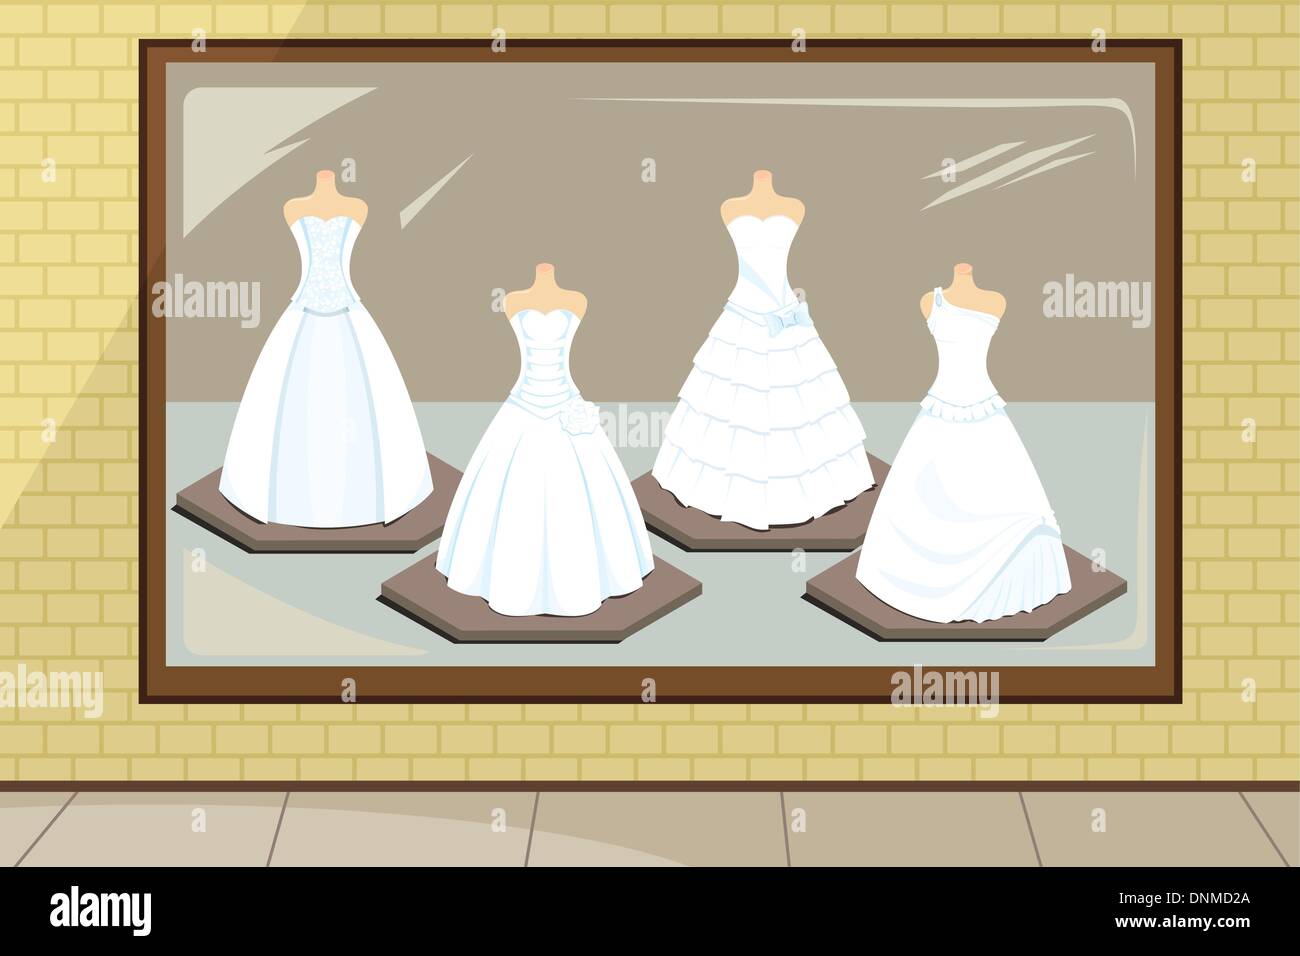 A vector illustration of wedding dresses in store display Stock Vector